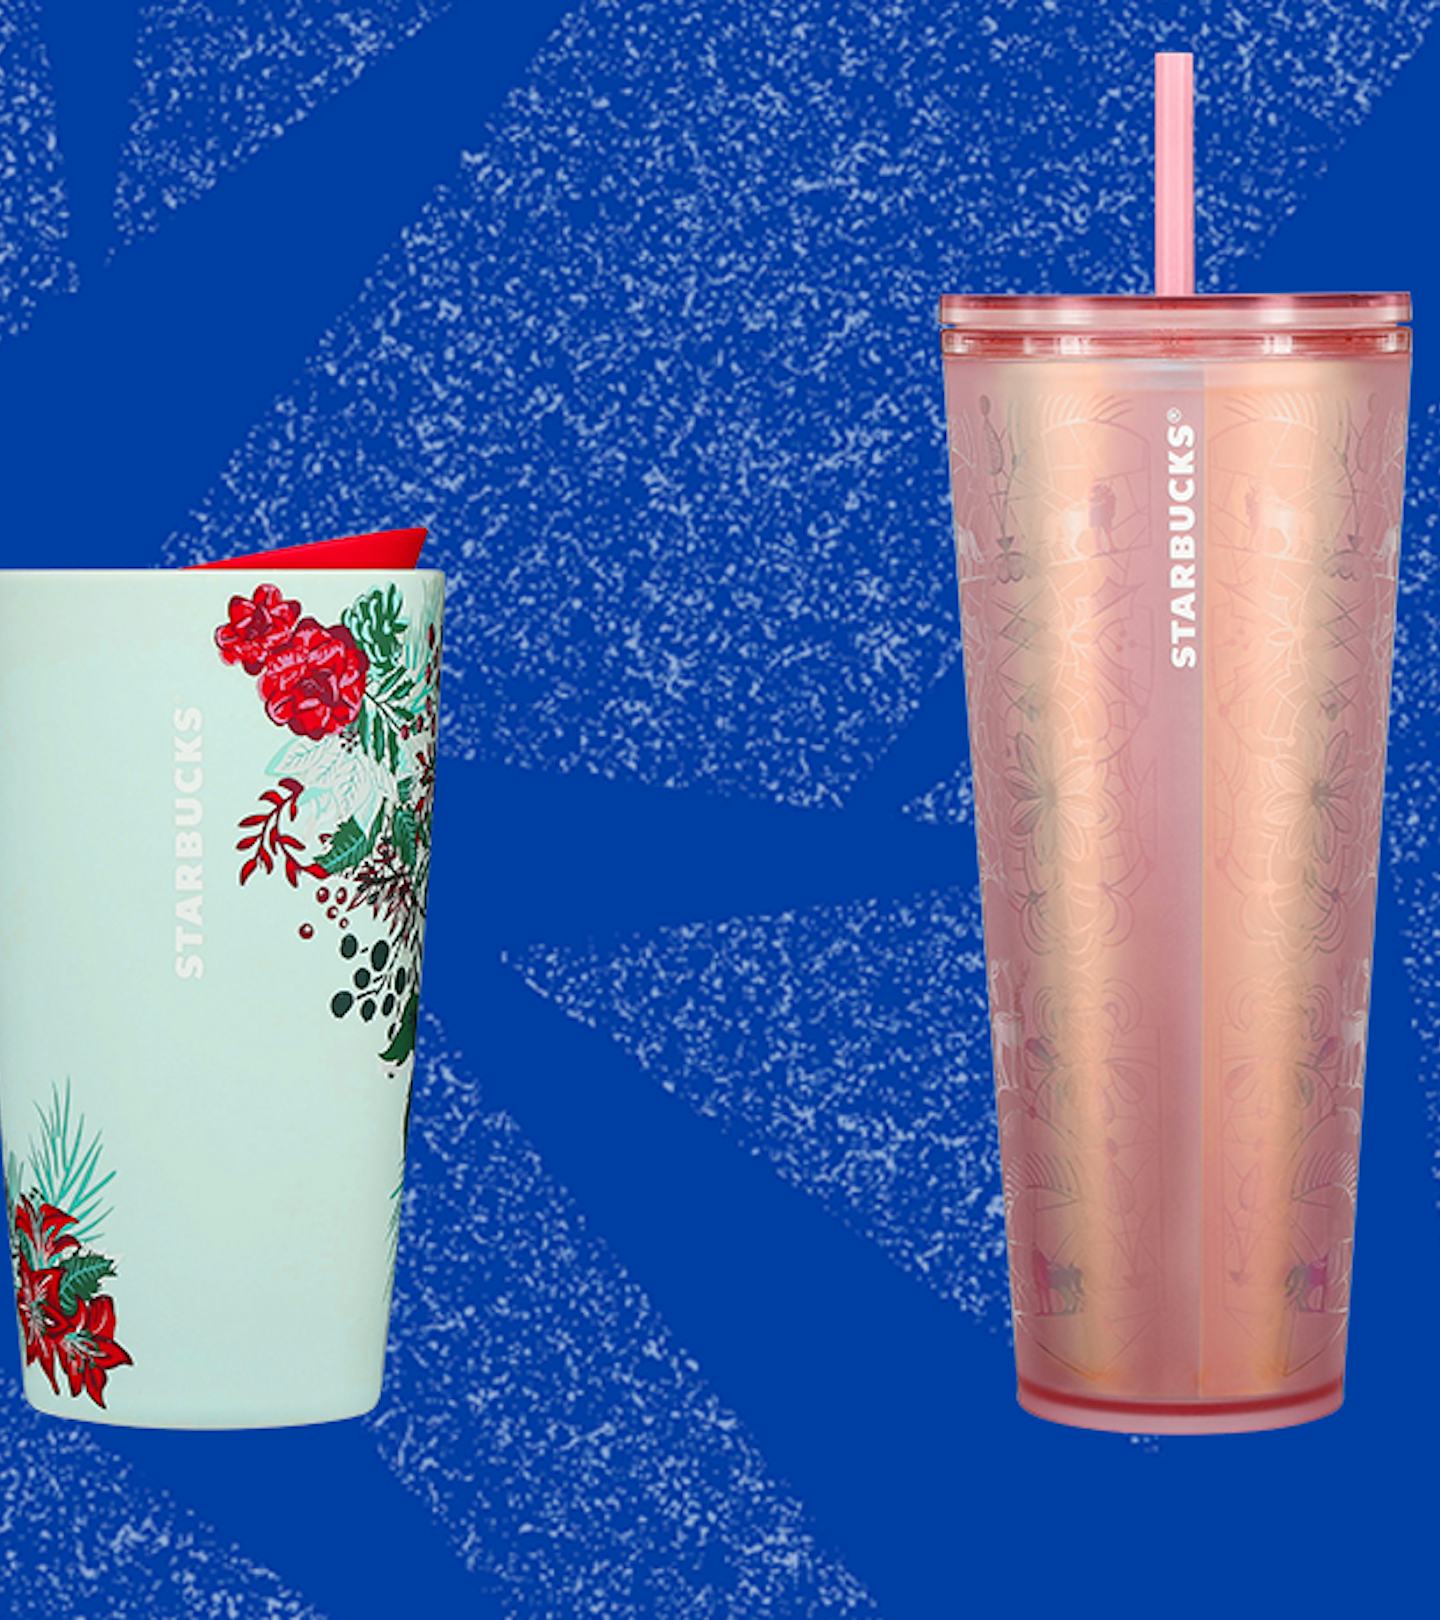 When Do Starbucks Holiday Drinks & Tumblers Come Out In 2022?